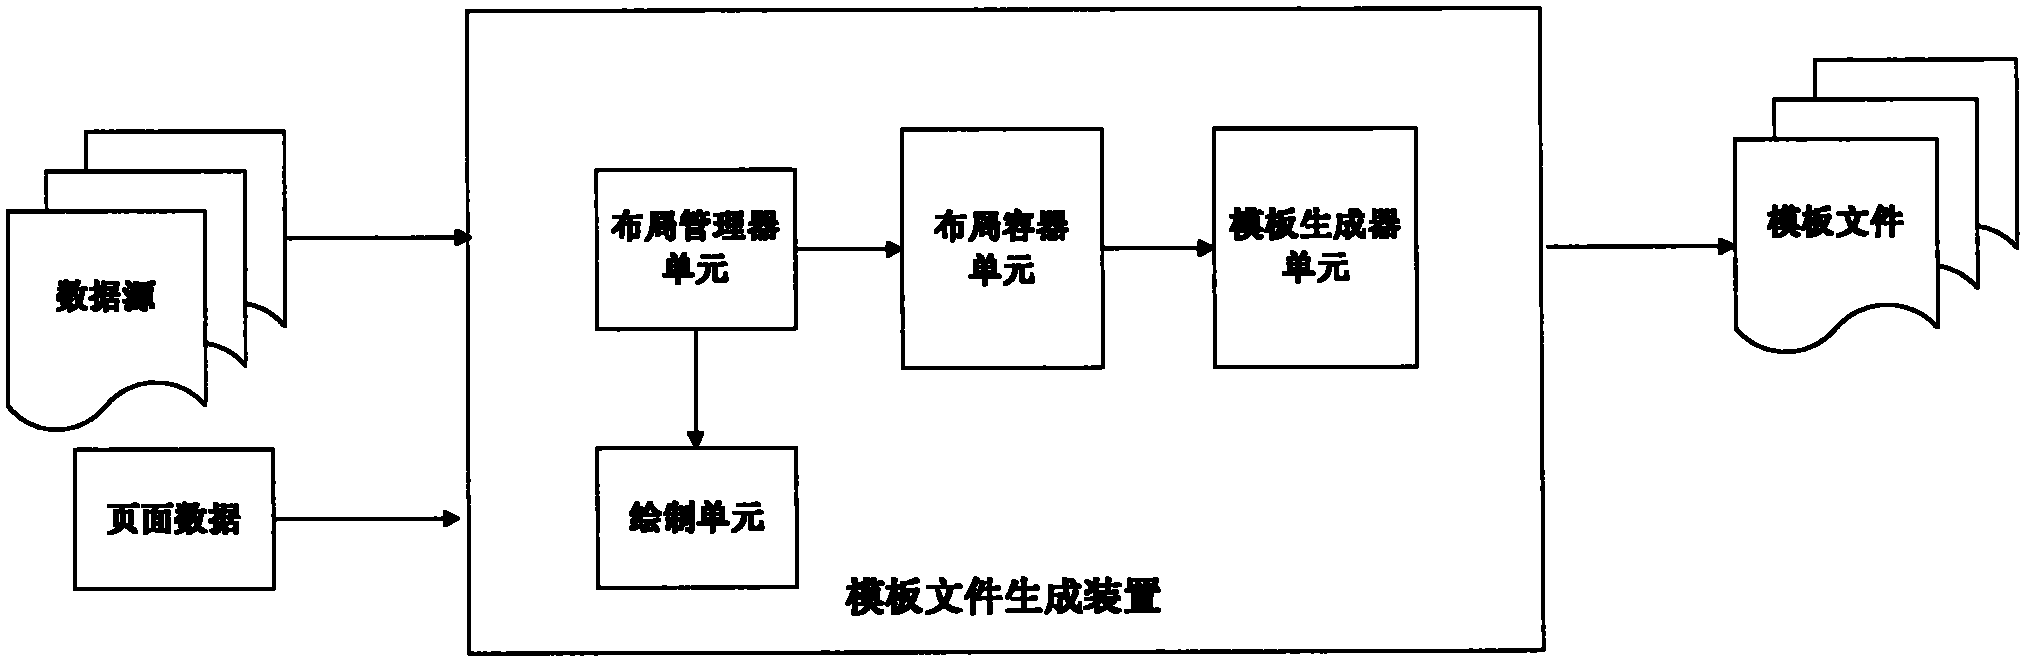 Variable-data printing template realization device and application method for same